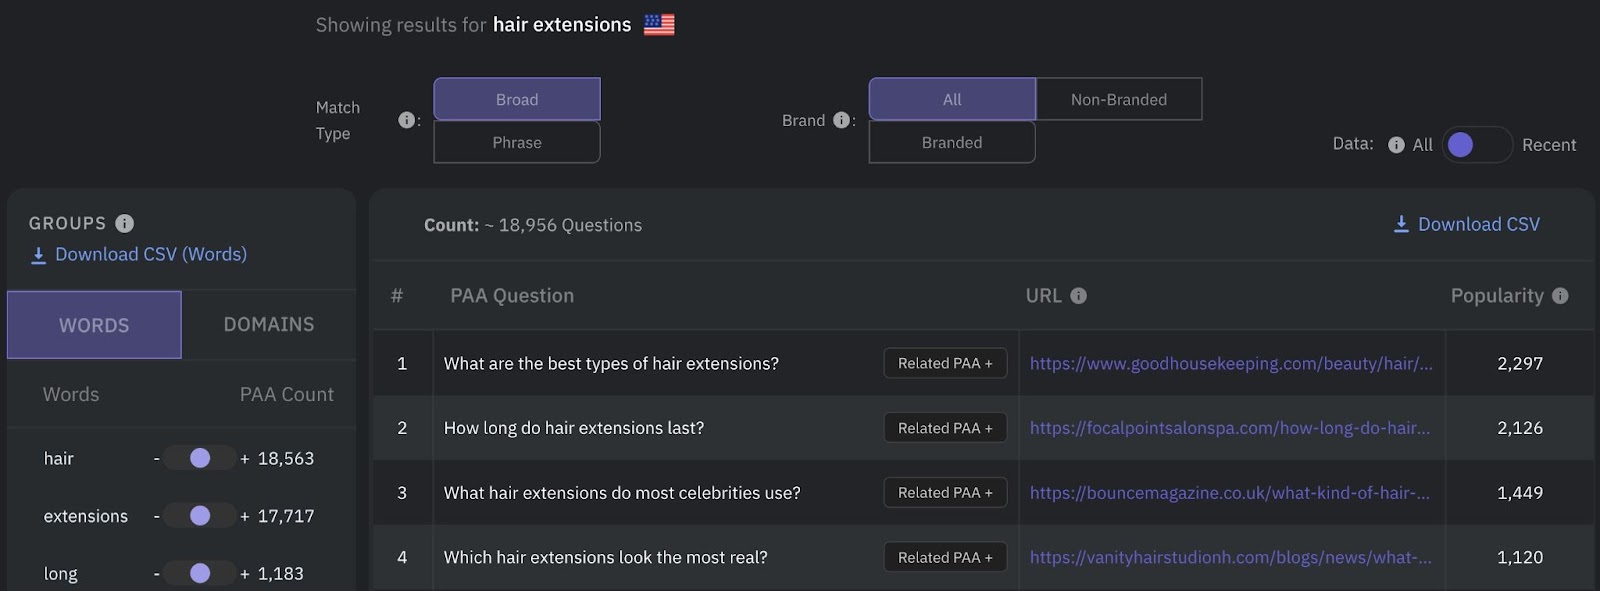 PAA questions for "hair extensions" in Search Response